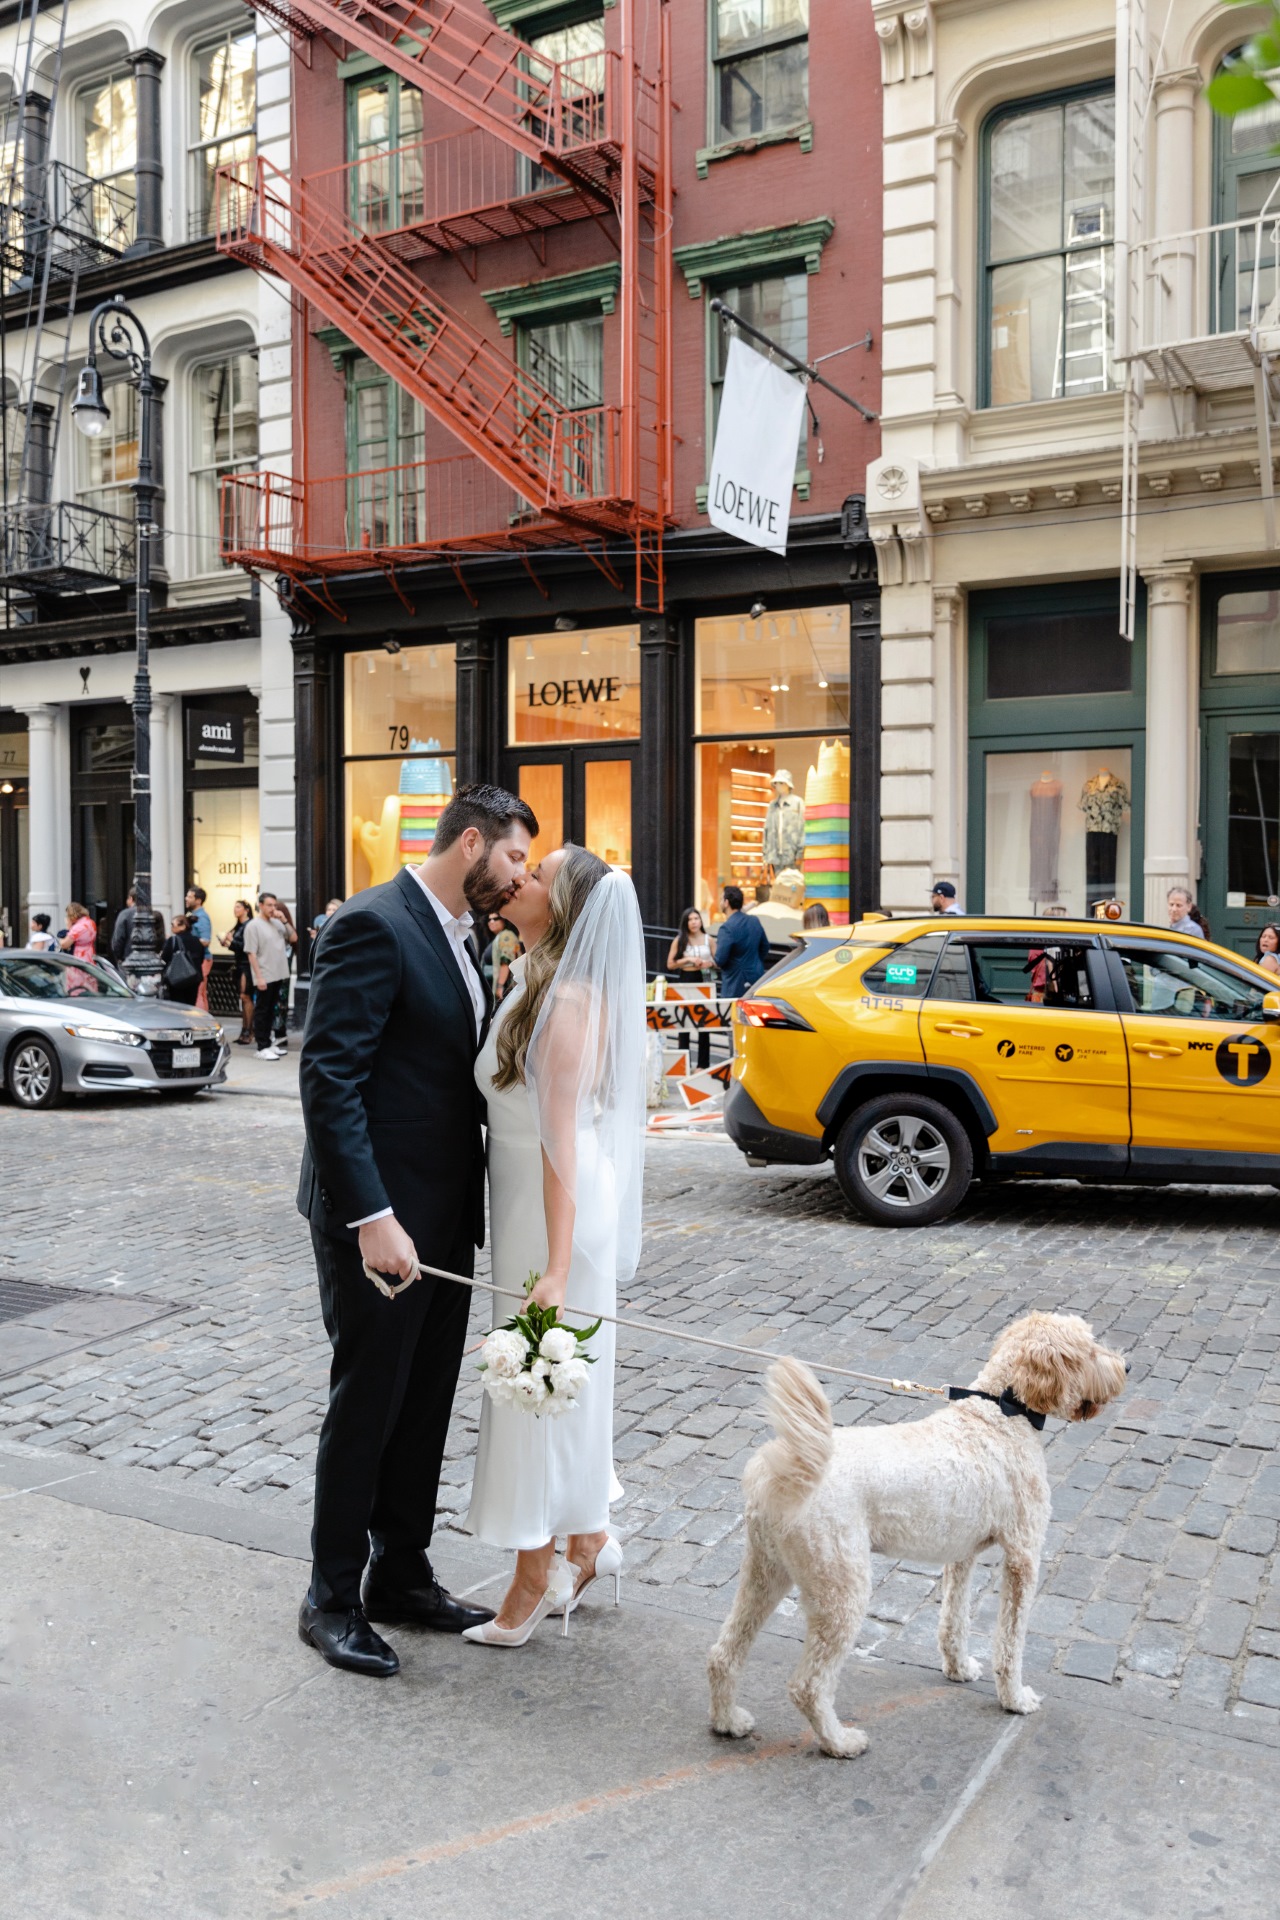 Engagement photos in soho nyc (6)